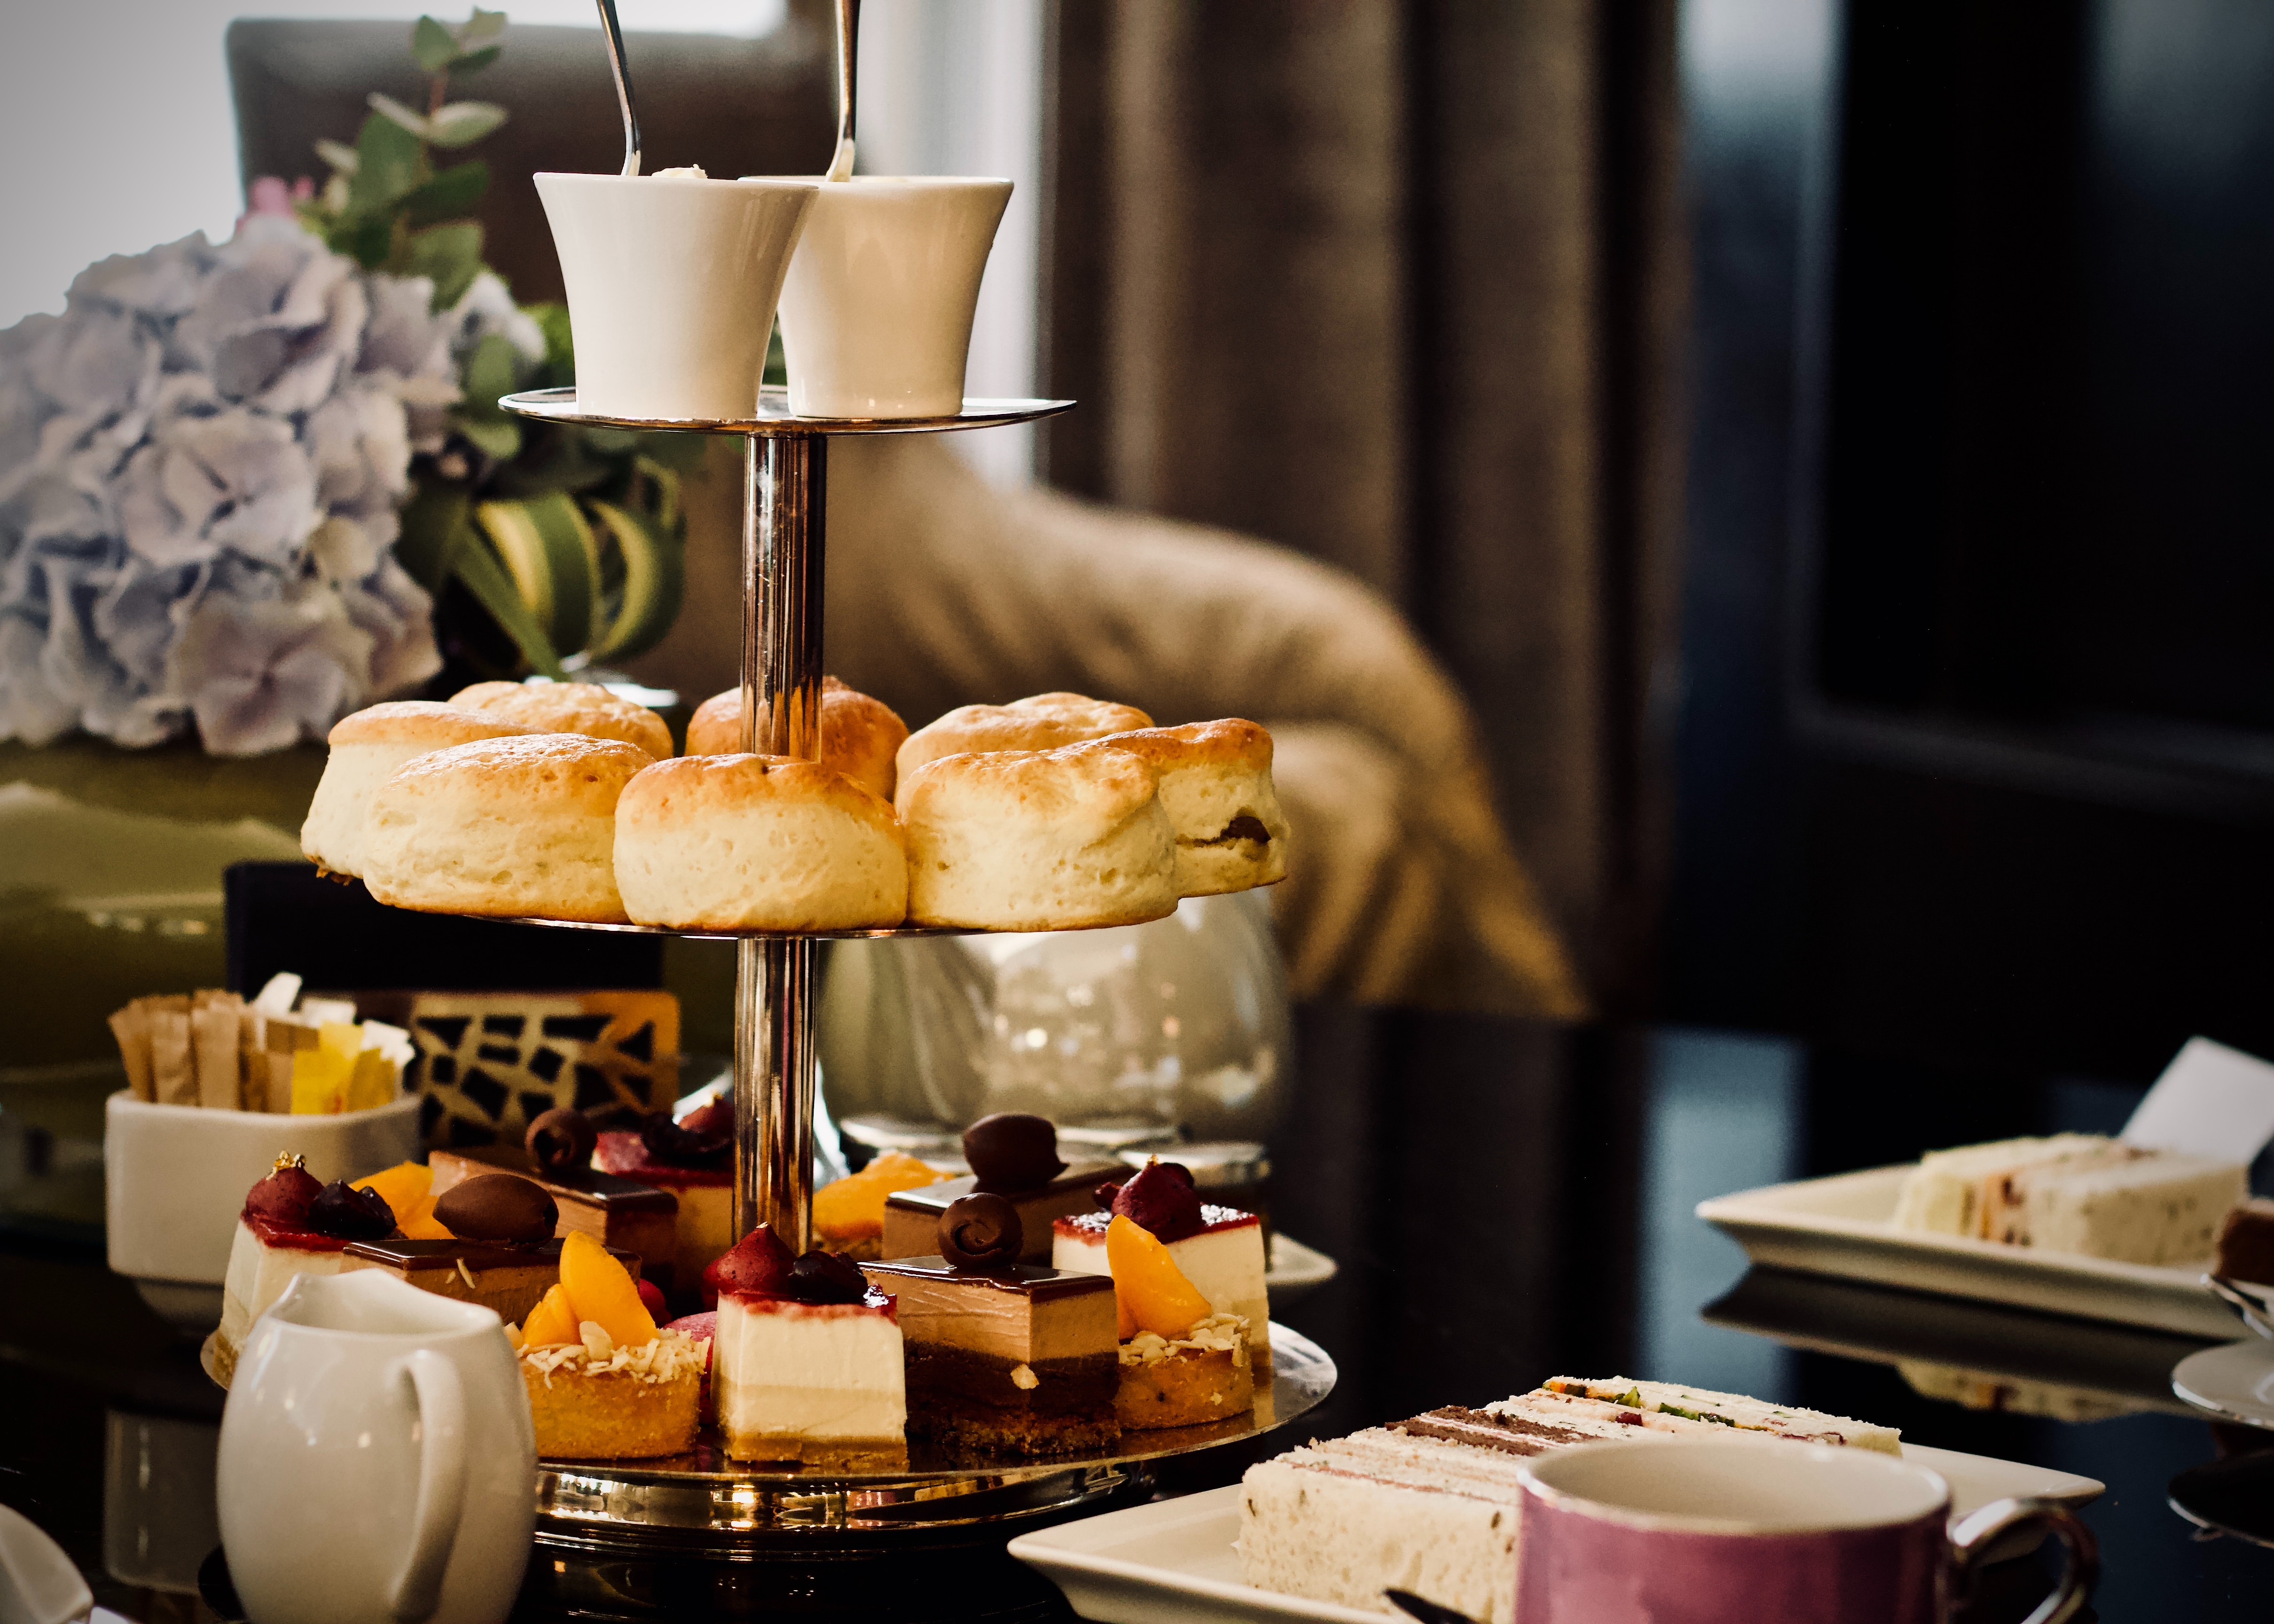 An image of afternoon tea